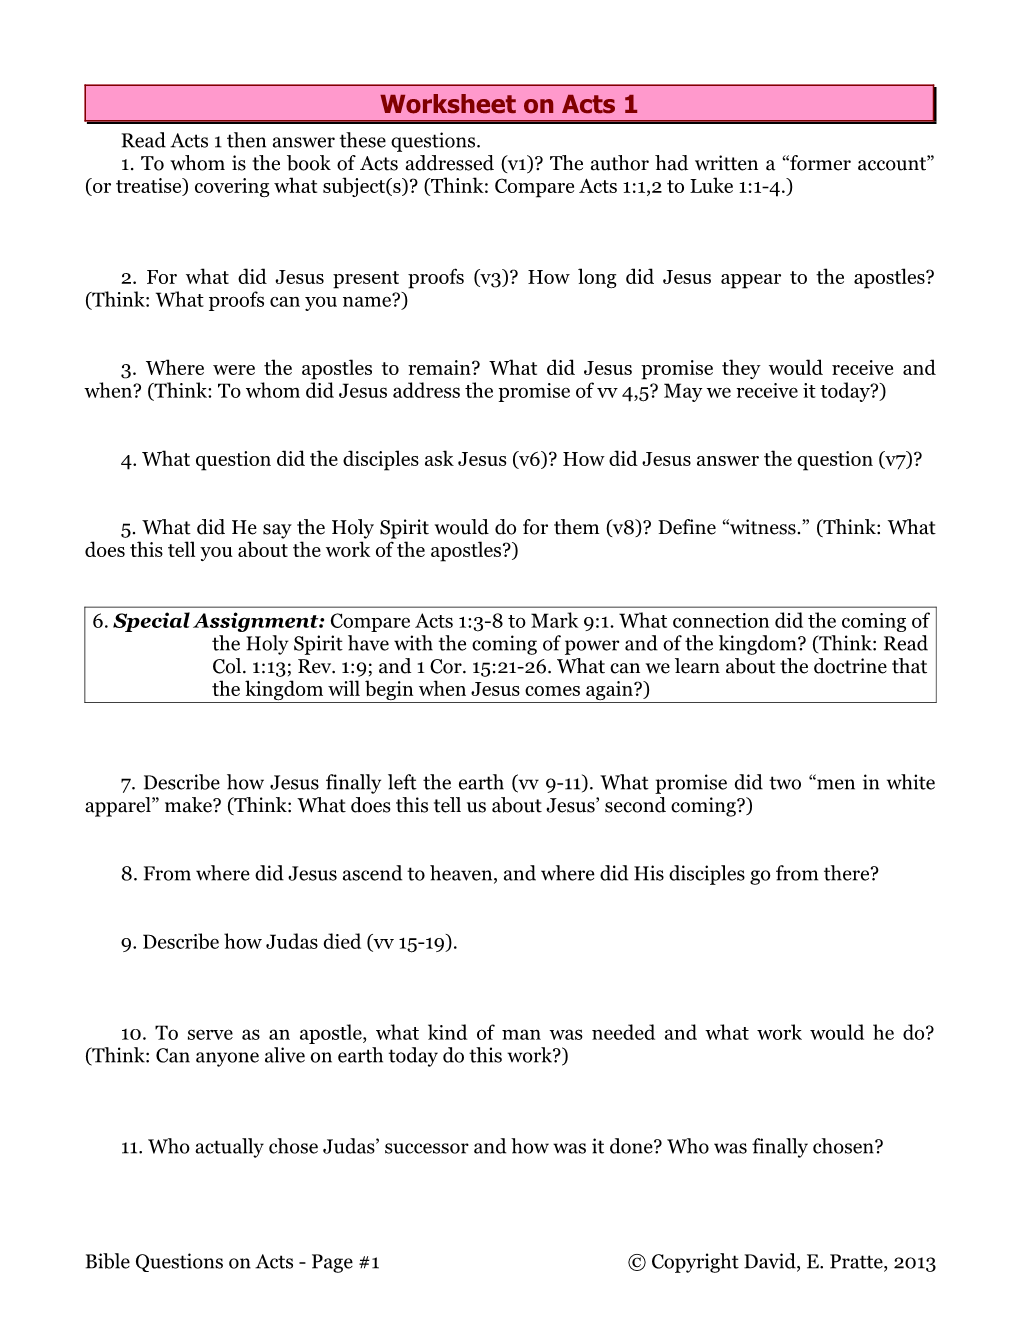 Read Acts 1 Then Answer These Questions